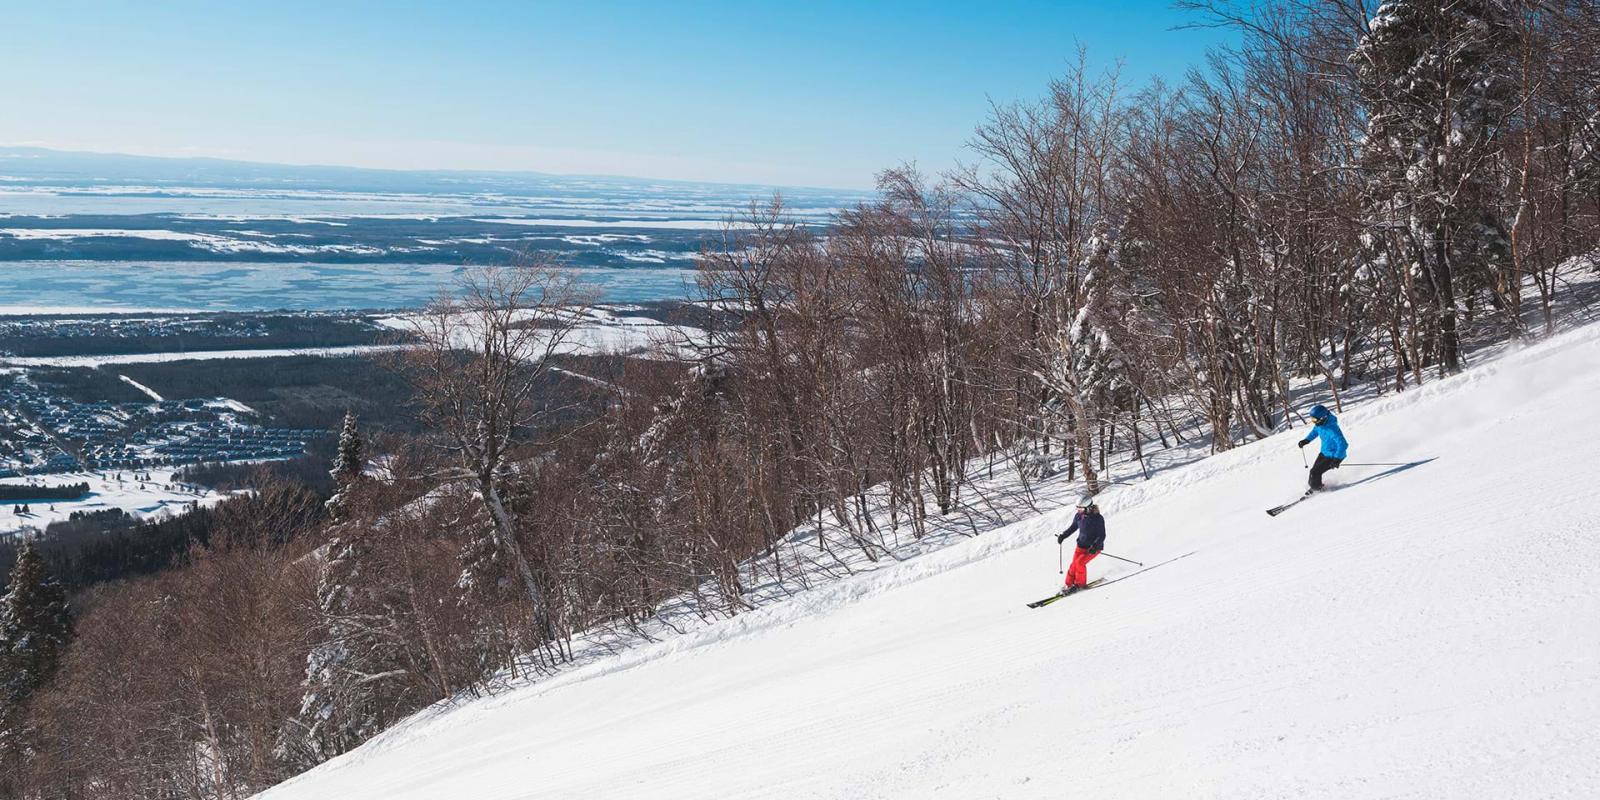 Two skiers go downhill skiing at Mont-Sainte-Anne station with a view of the St. Lawrence River.